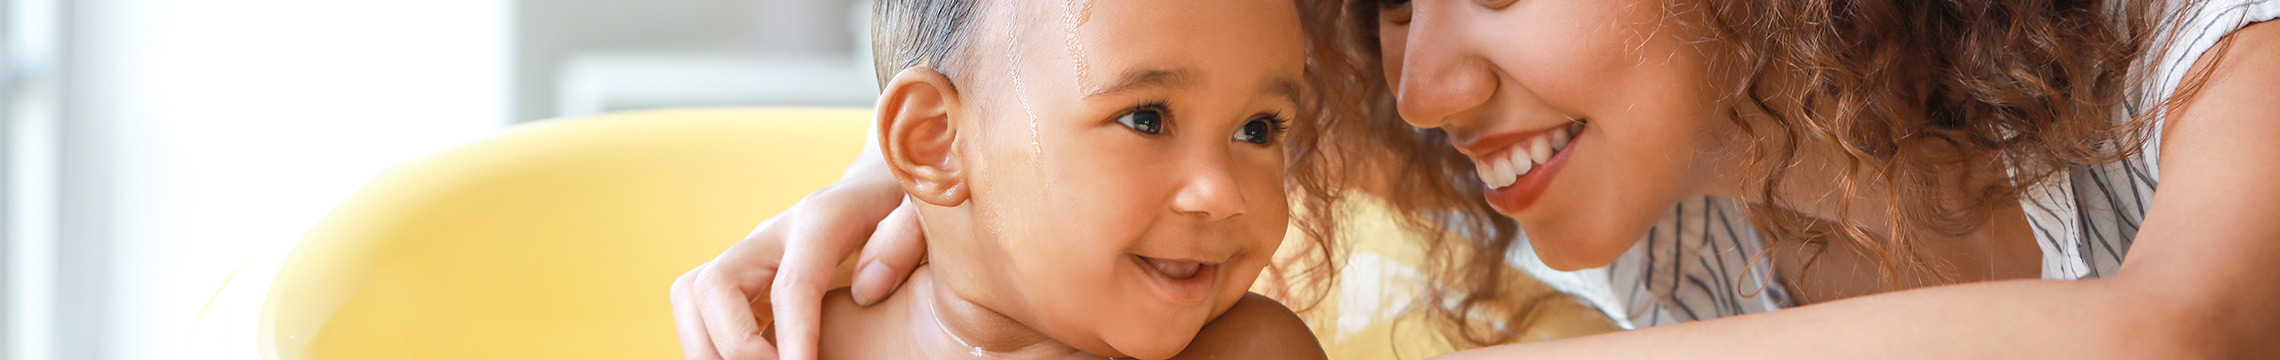 Baby in bathtub giggling while mother washes shoulders